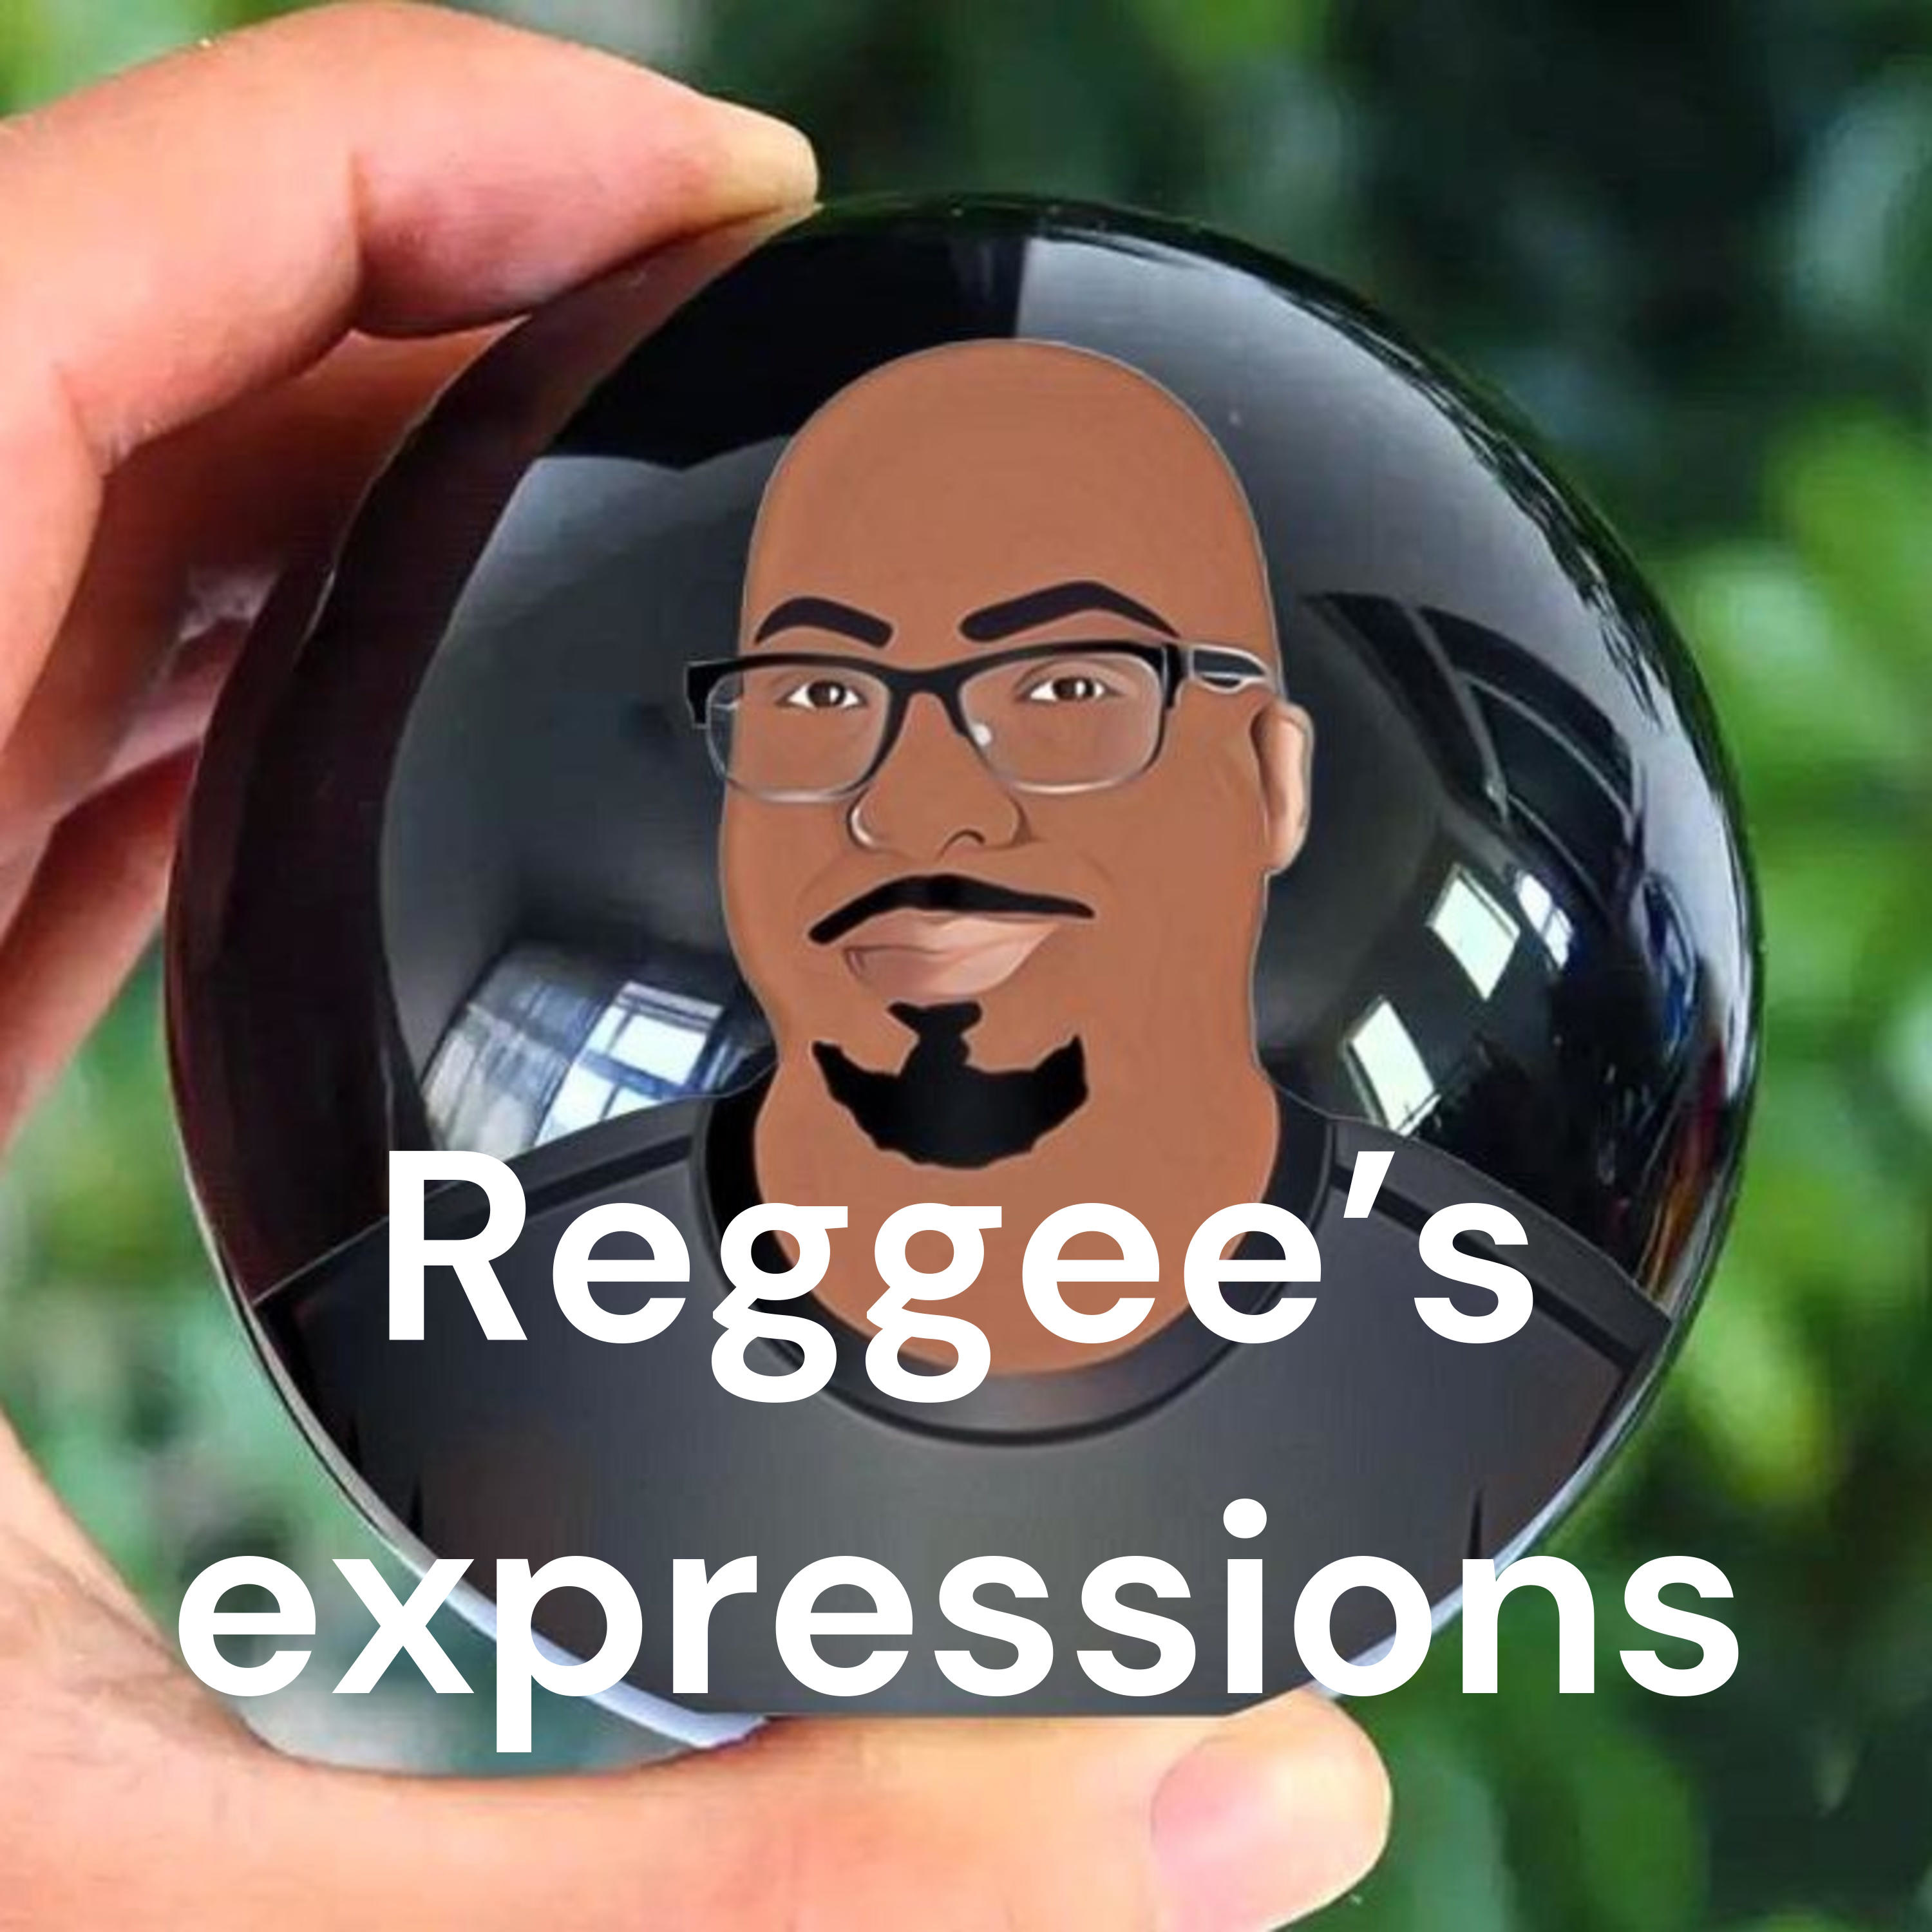 Reggee’s expressions